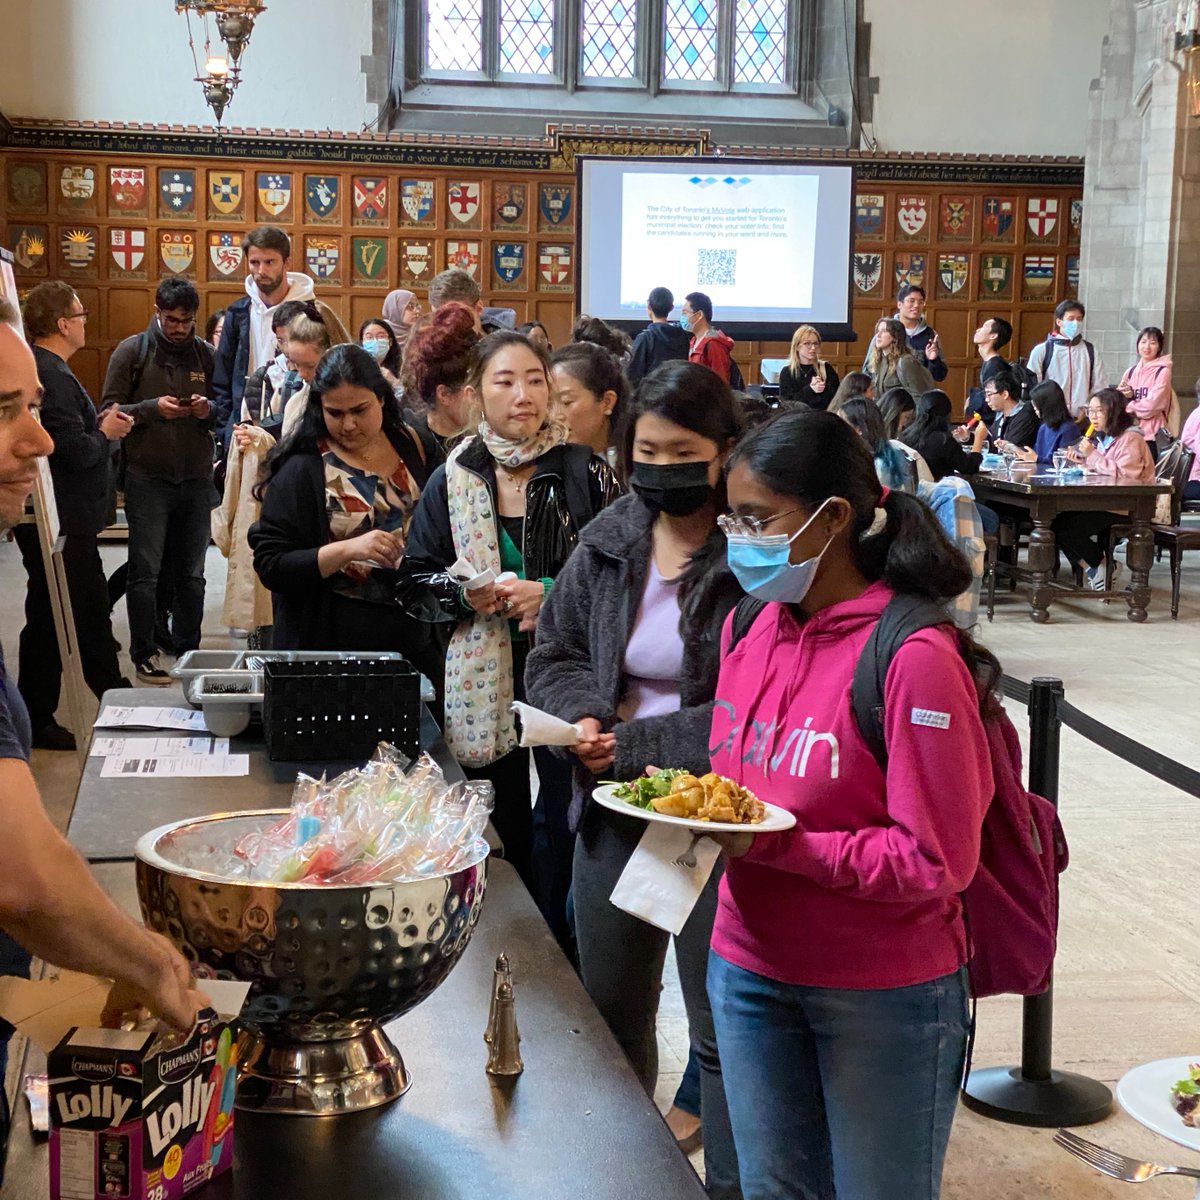 5-Buck Lunch is back next week! @harthouseuoft is hosting a tasty meal created by Executive Chef Marco Tucci — Tuesday, Oct. 25, 11:45am-12:45pm, in the Great Hall. Details here: harthouse.ca/events/5-buck-… #UofT